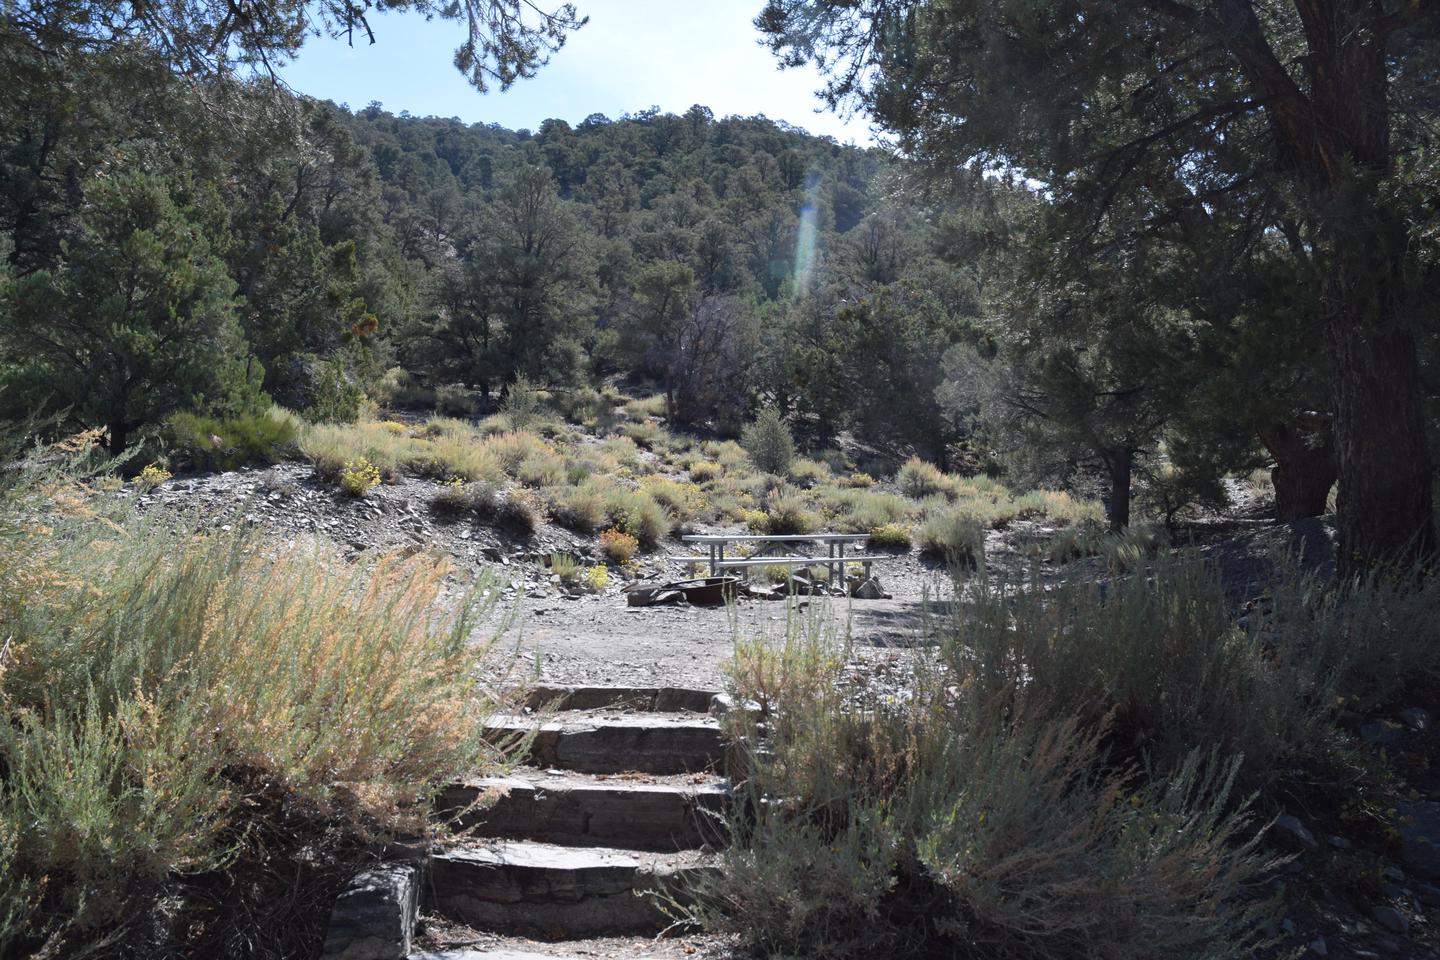 Thorndike CampgroundThis primitive campground is within a pinyon pine and juniper forest.